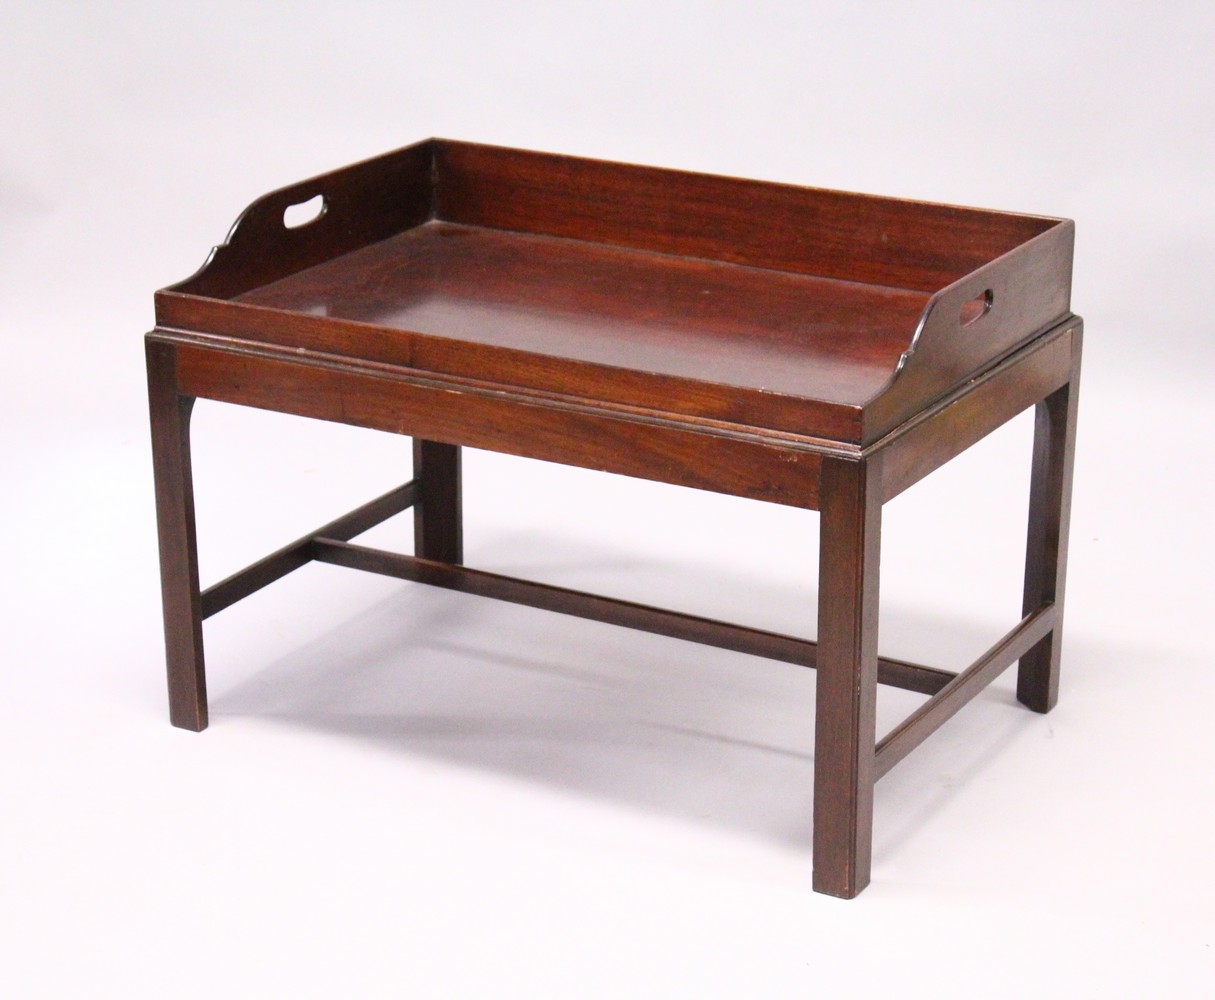 A GEORGE III MAHOGANY BUTLERS TRAY, on later stand. 2ft 9.5ins wide x 1ft 10.5ins deep x 1ft 10.5ins